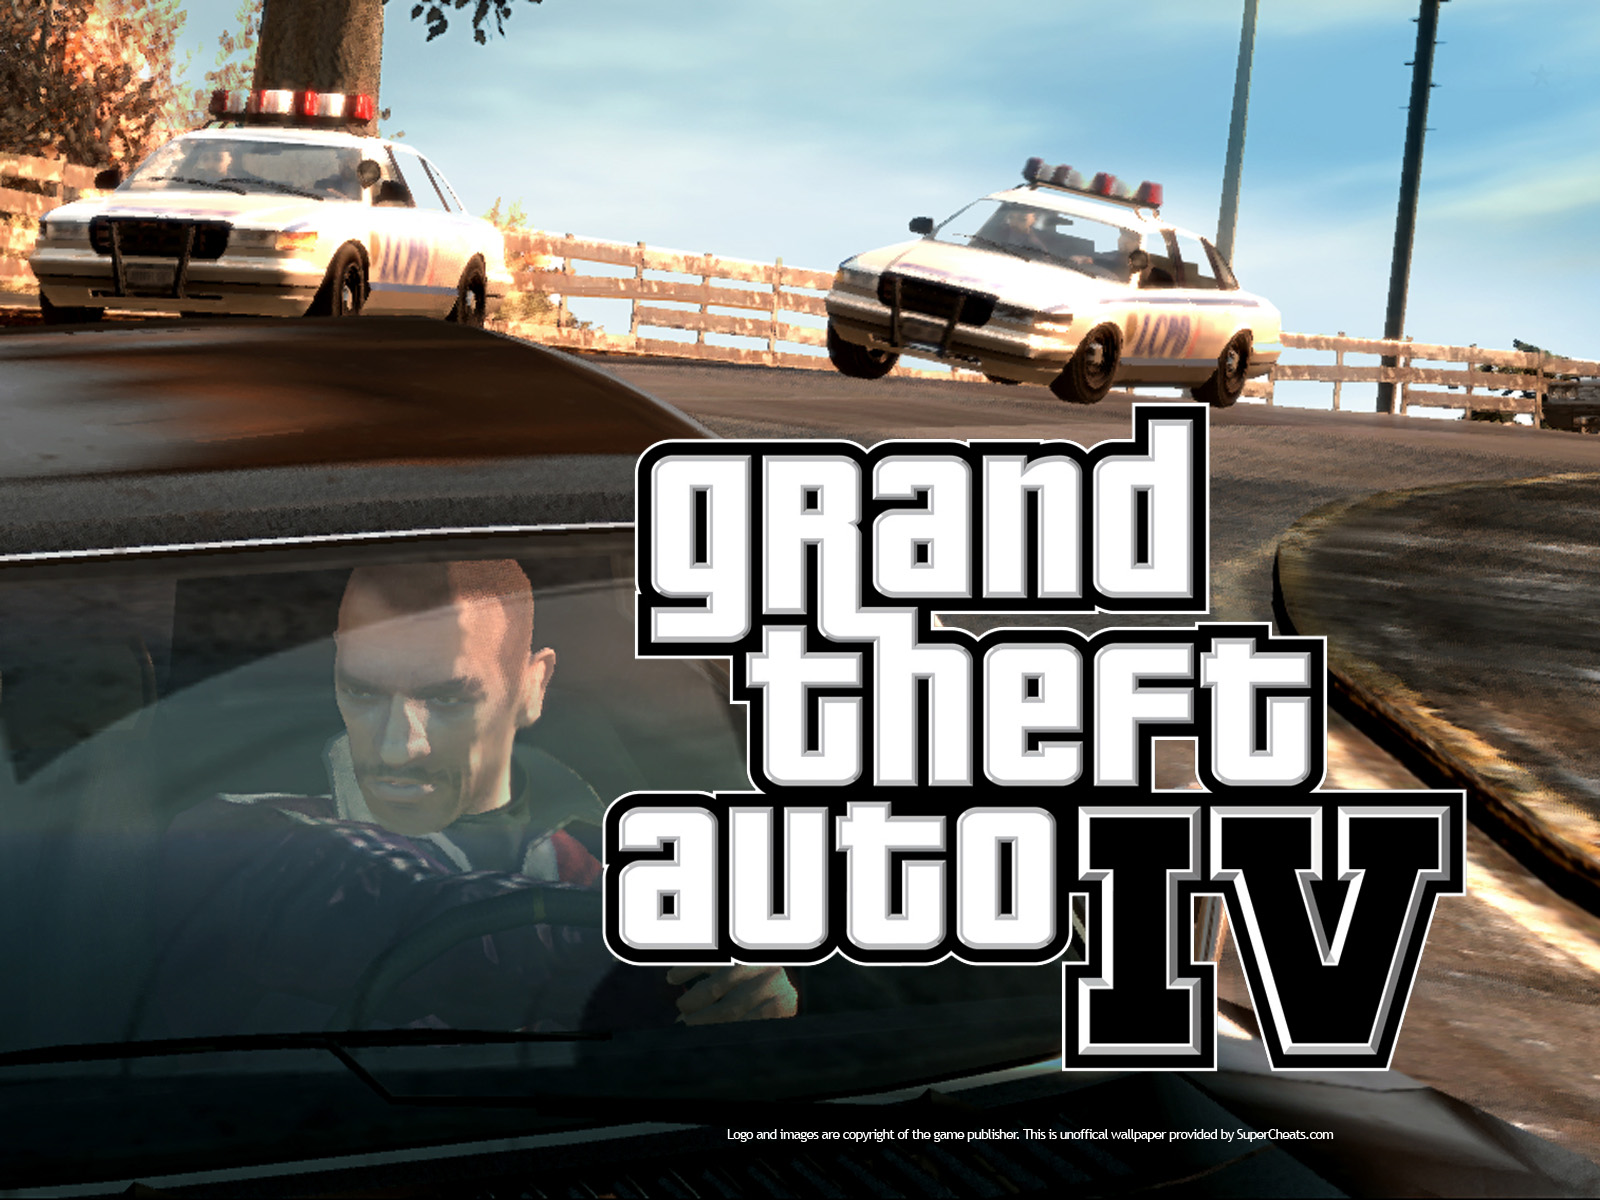 Save 70 on Grand Theft Auto IV: Complete Edition on Steam